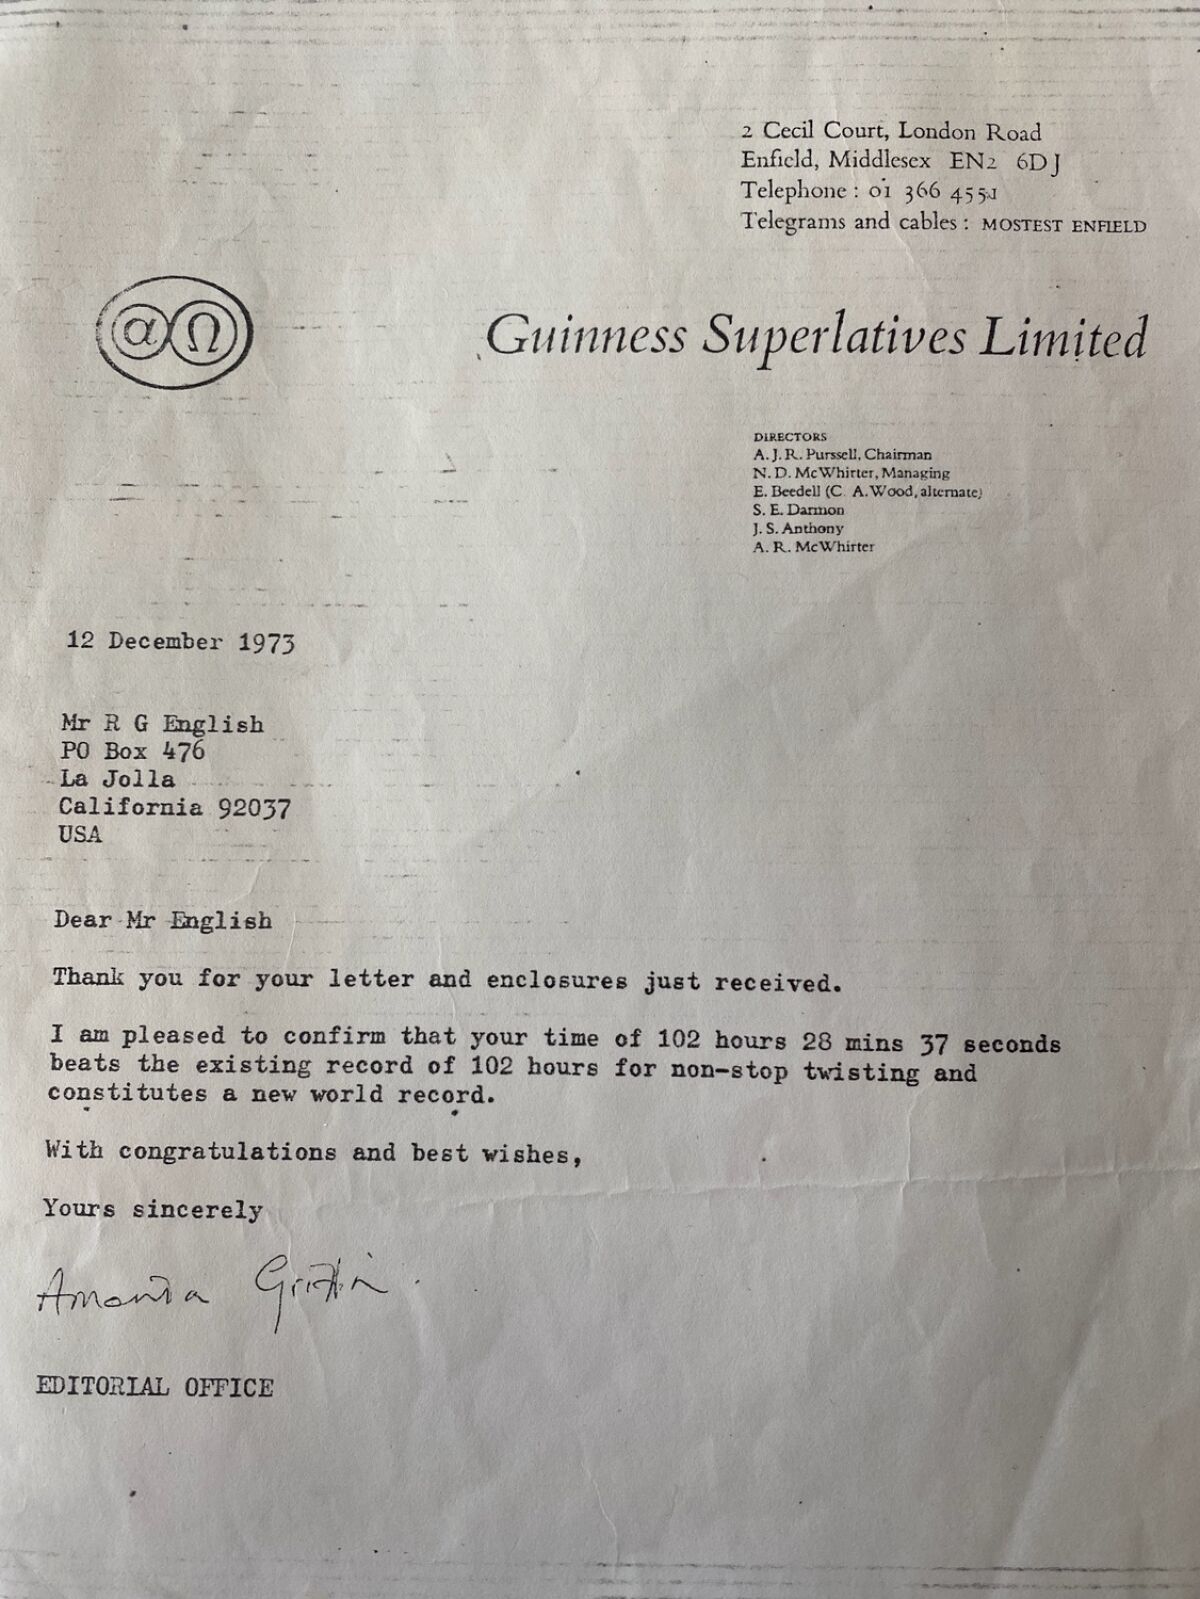 Roger Guy English's letter from Guinness for his Twisting feats. 